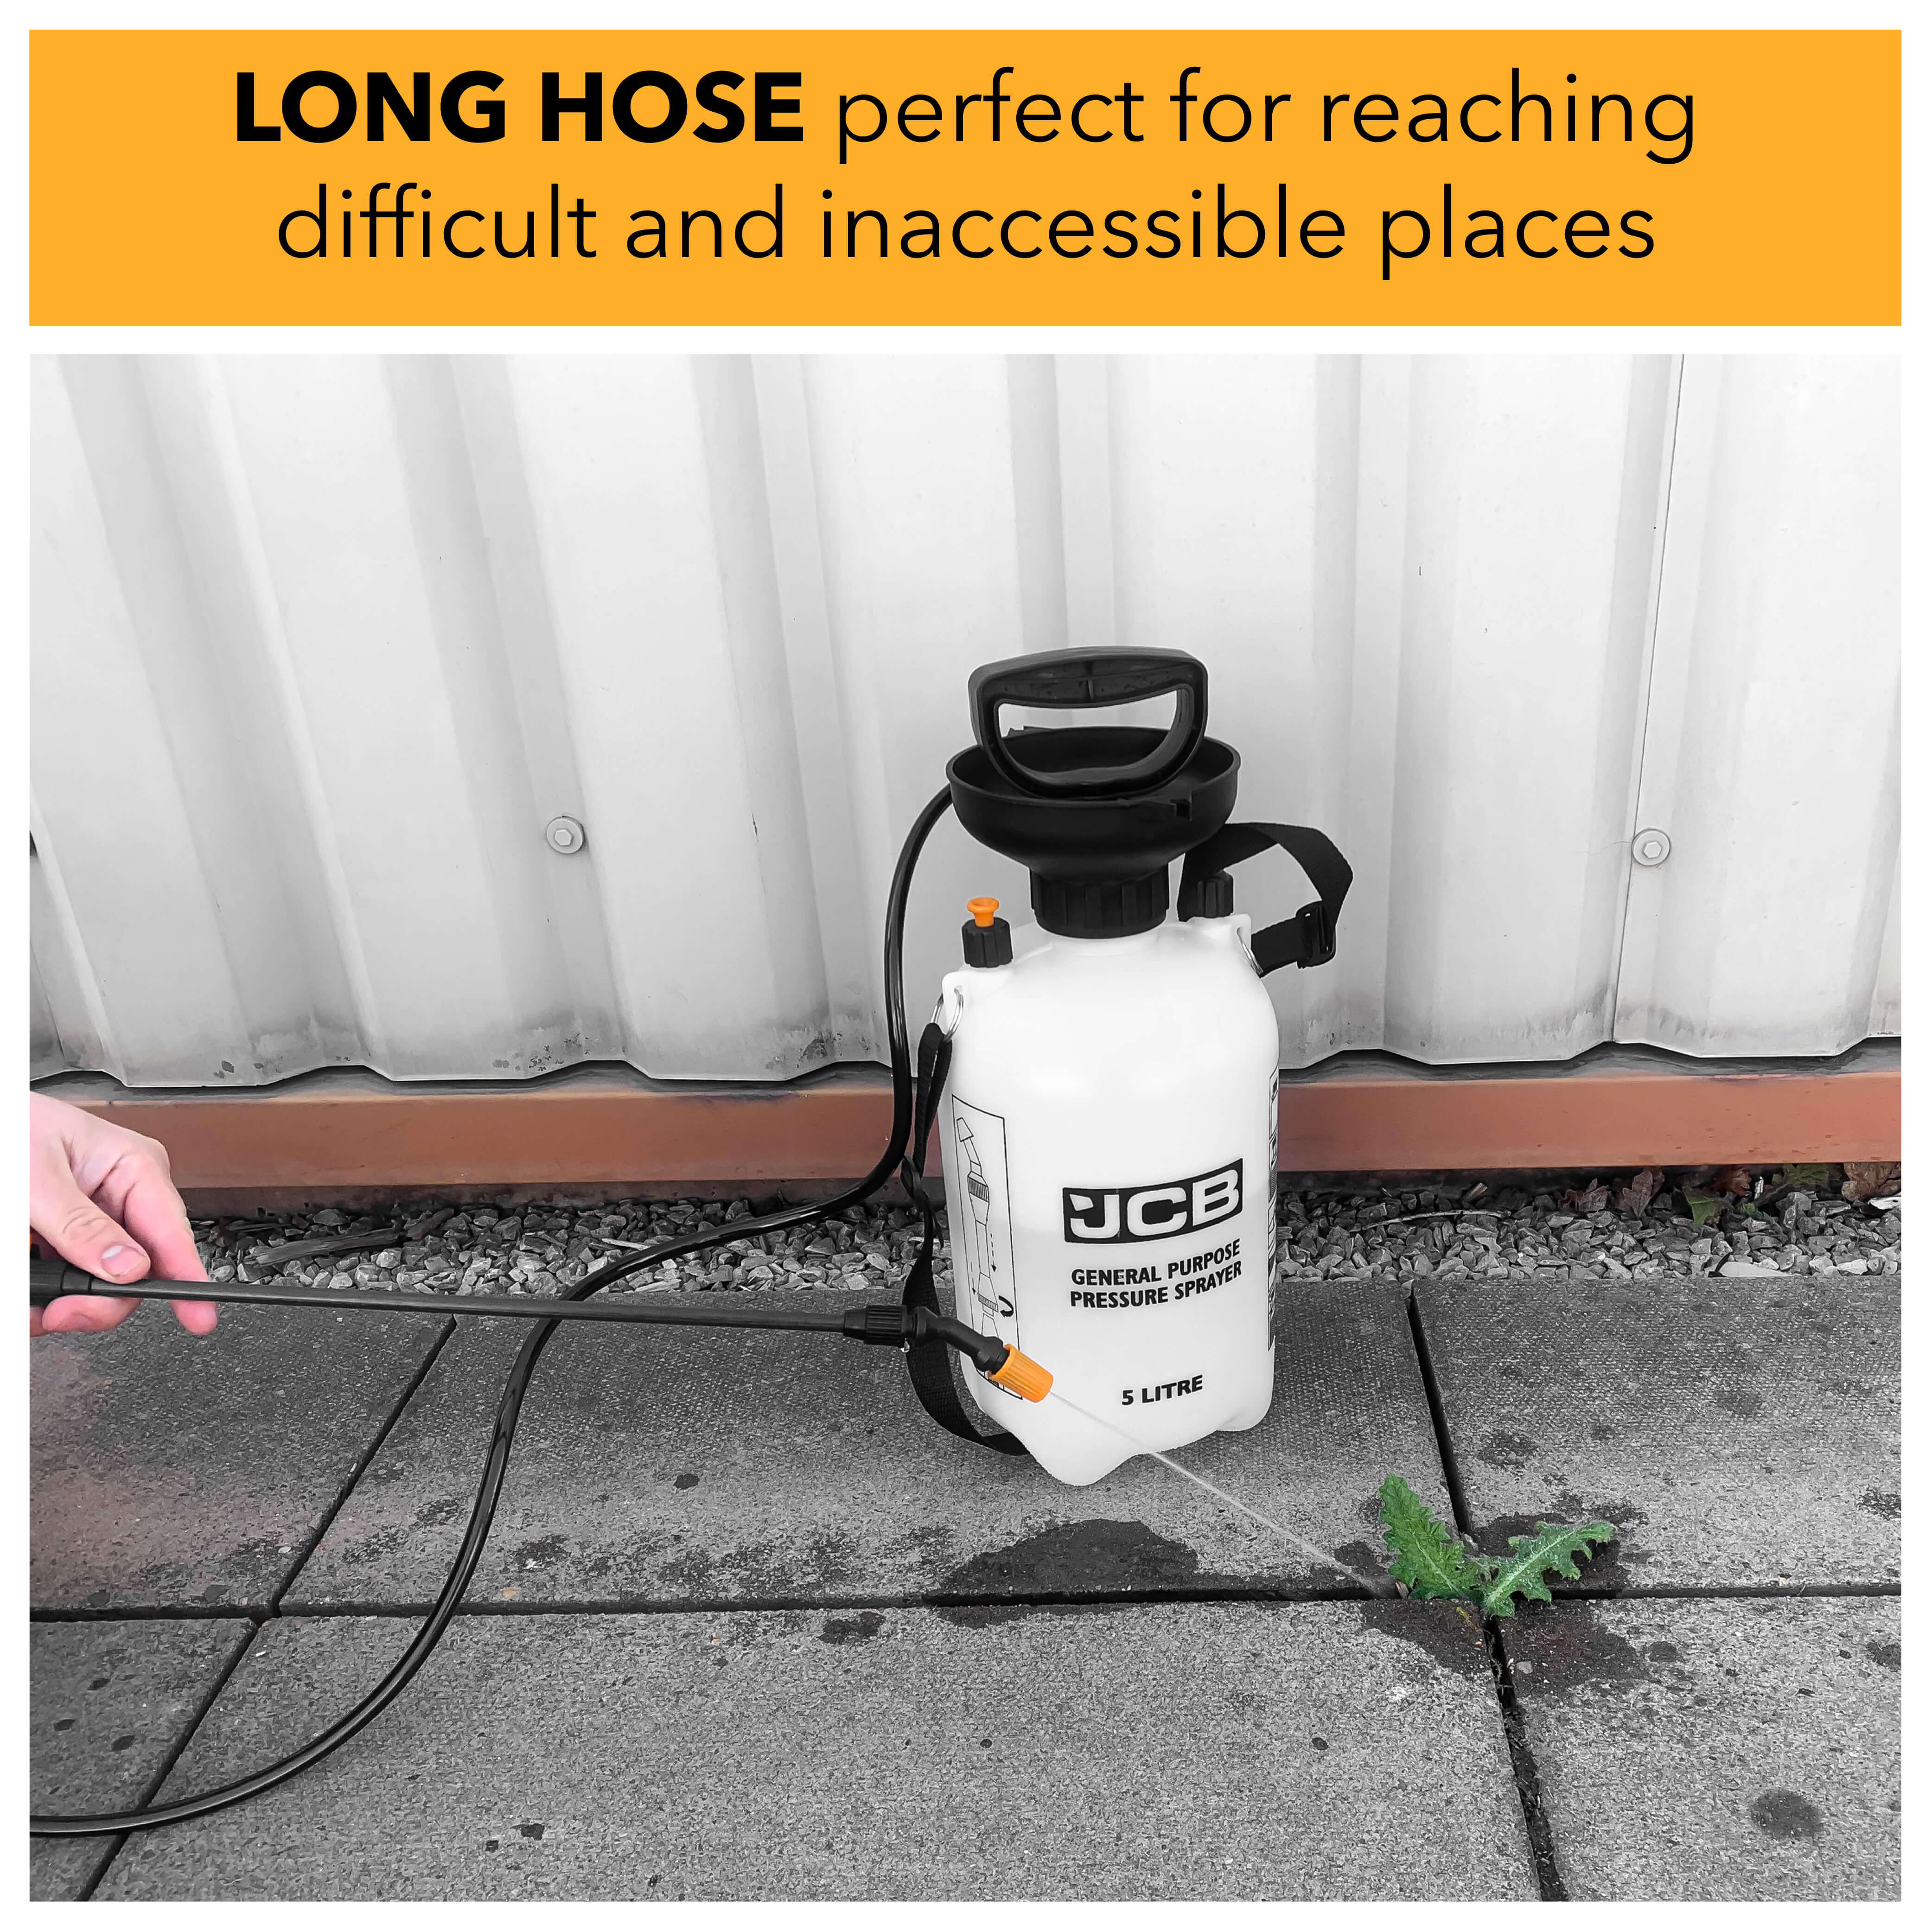 Long hose perfect for reaching difficult and inaccessible places